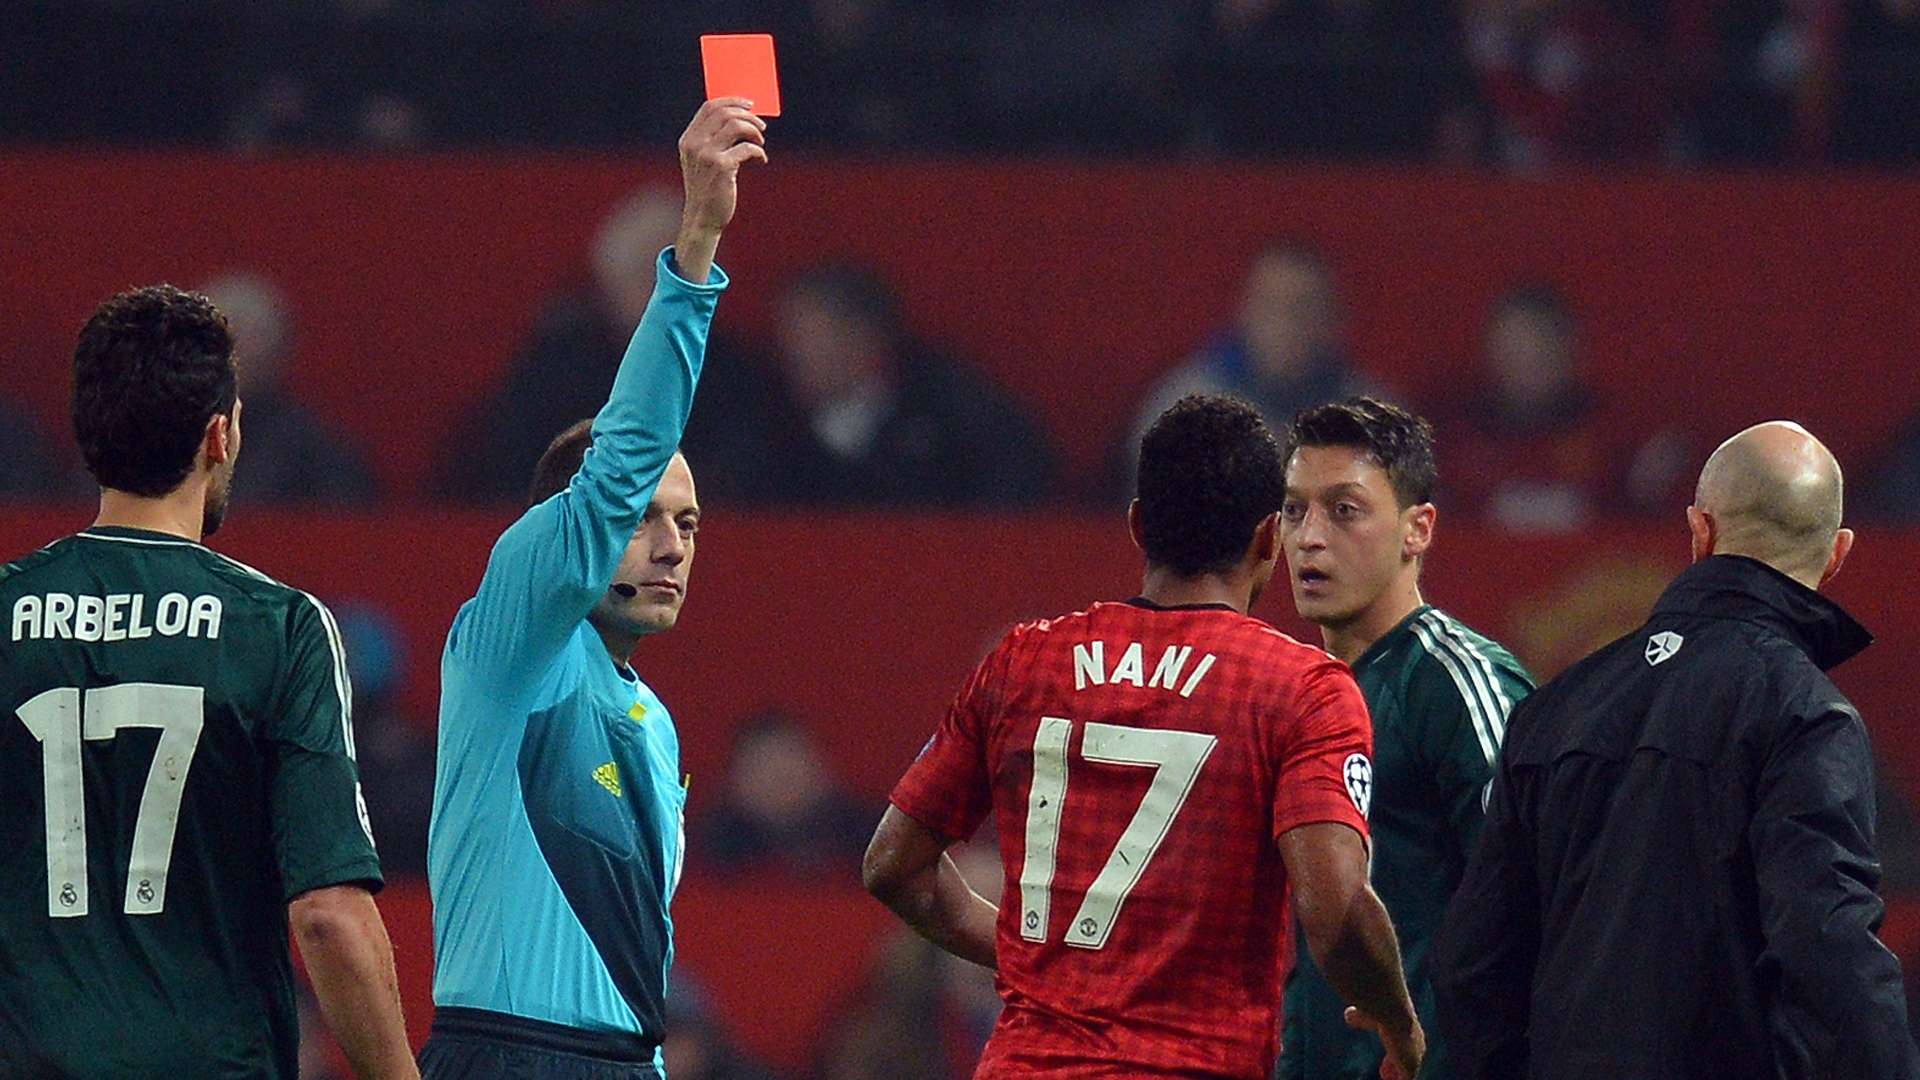 Referee Cuneyt Cakir shows Nani the red card s Nani the red card to send him off during he UEFA Champions League Manchester United and Real Madrid at Old Trafford 2013